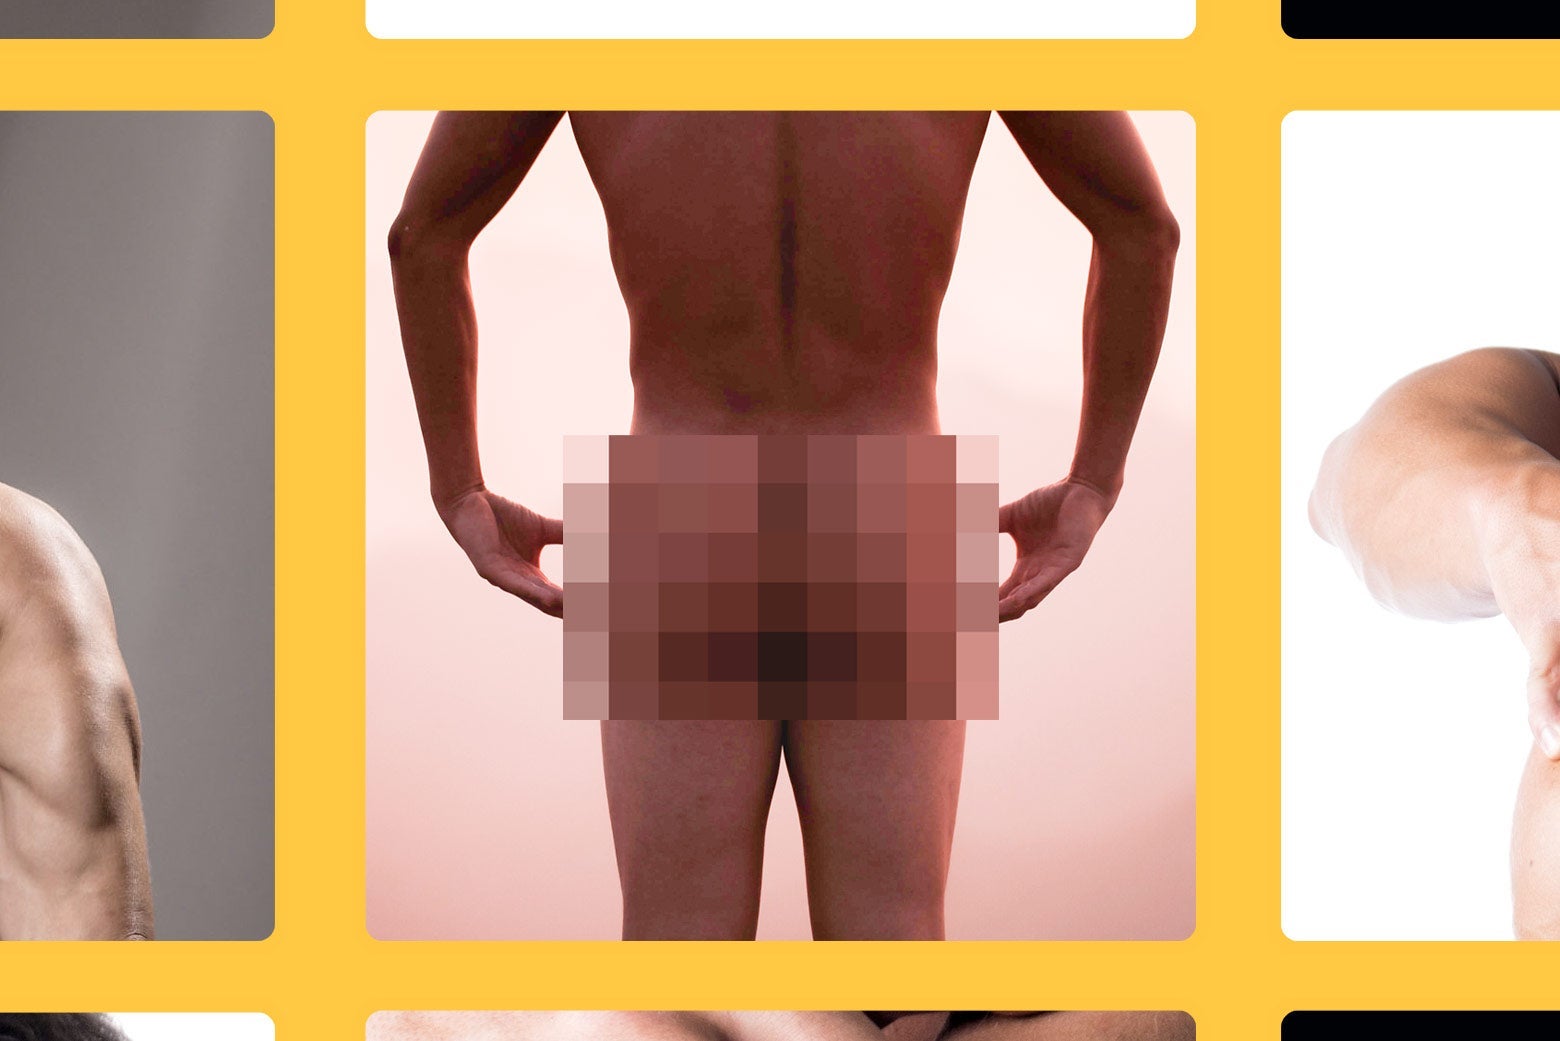 Grindr Whats behind the new rule thats surprising users? picture